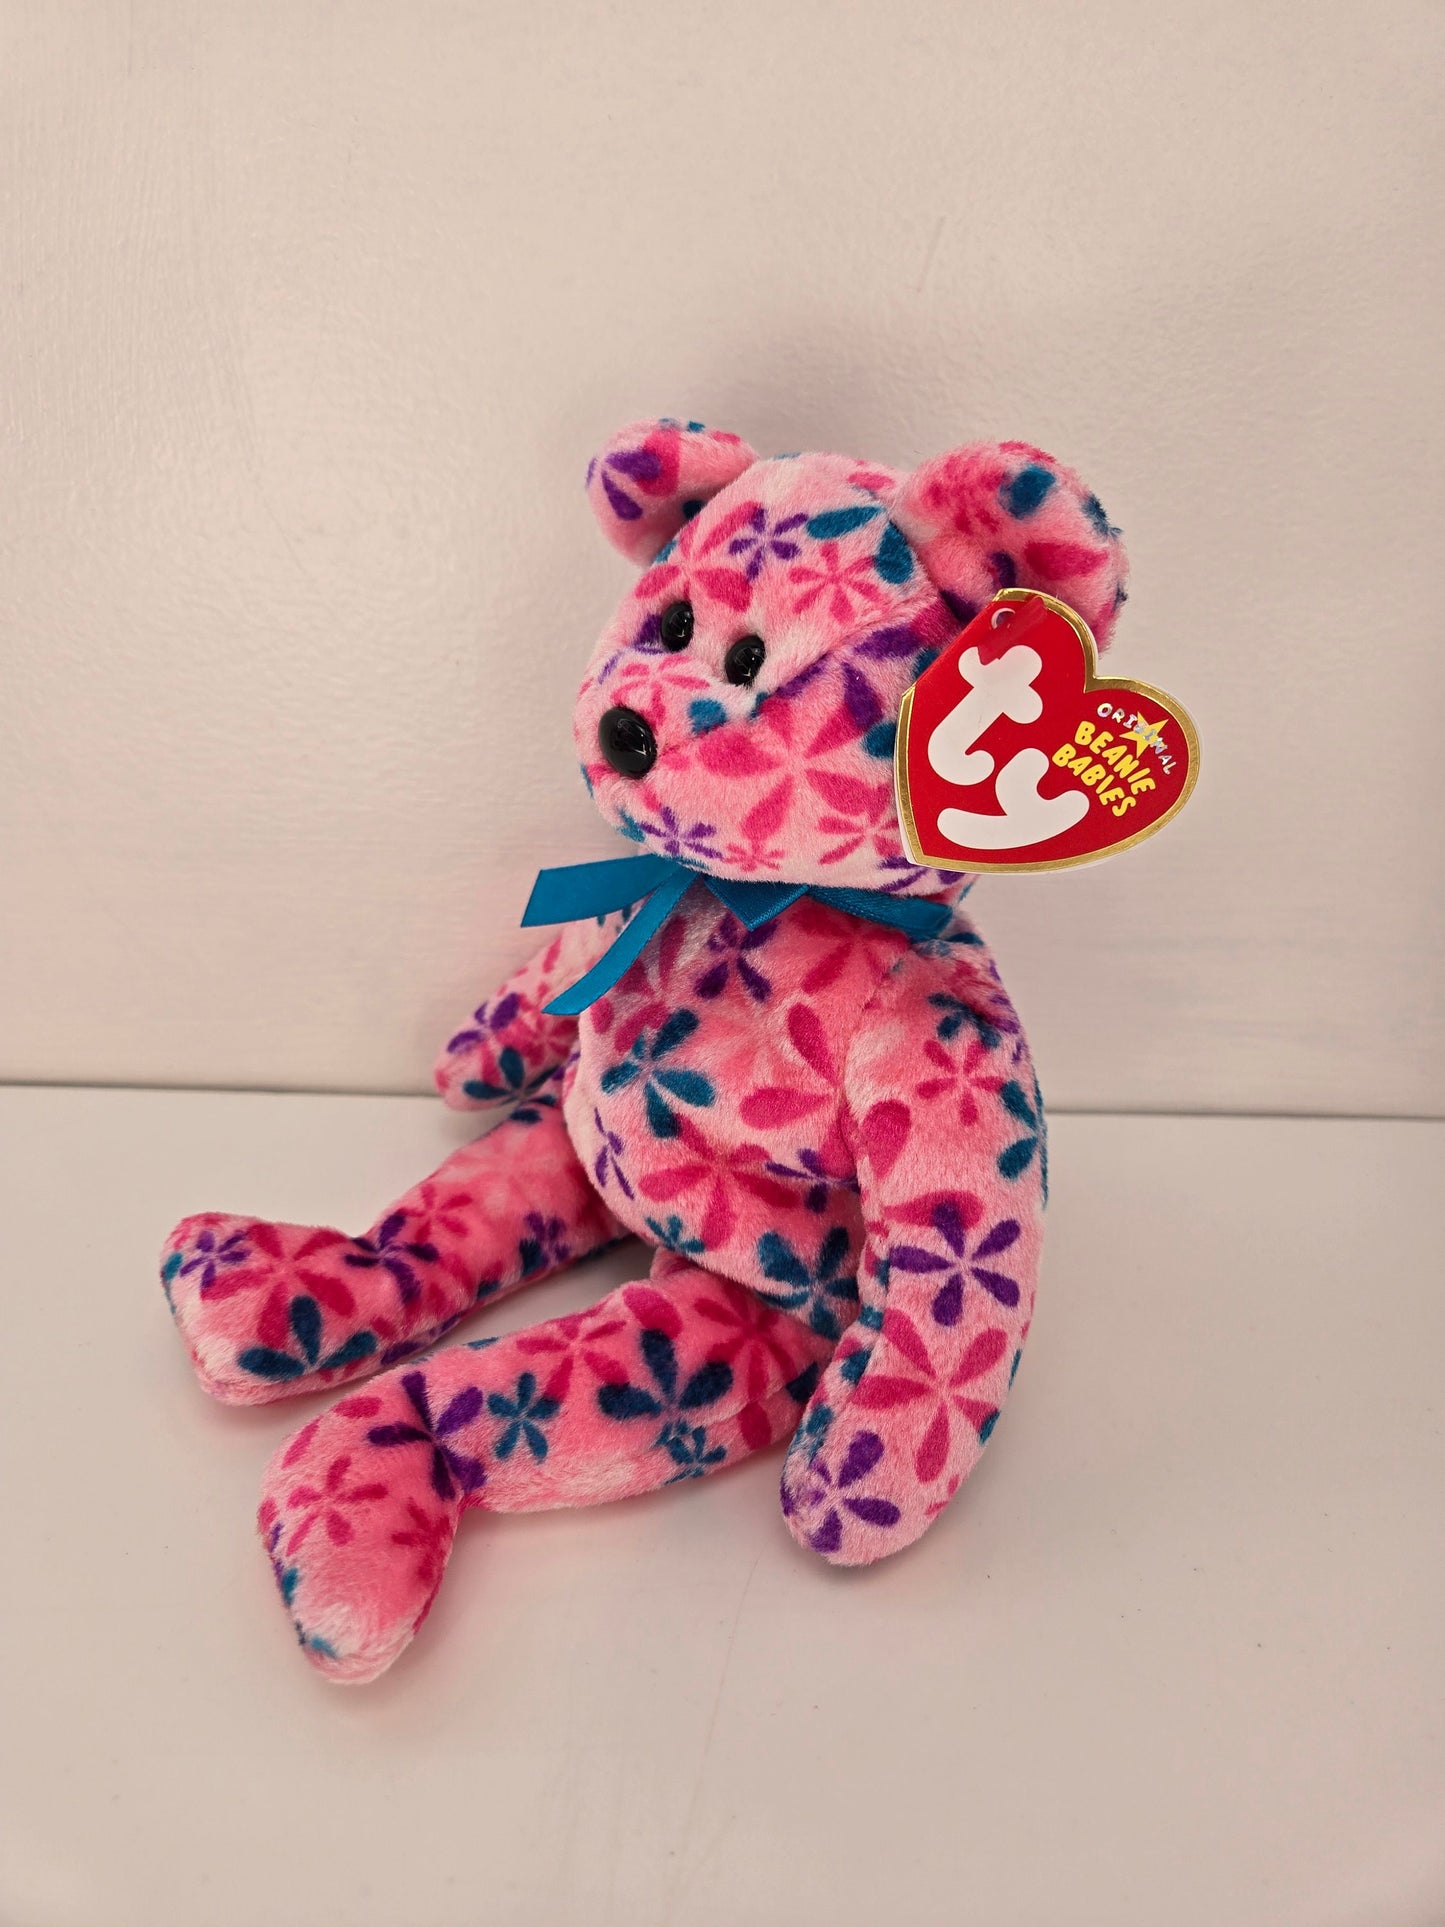 Ty Beanie Baby “Funky” the Pink Flower Bear! (8.5 inch)